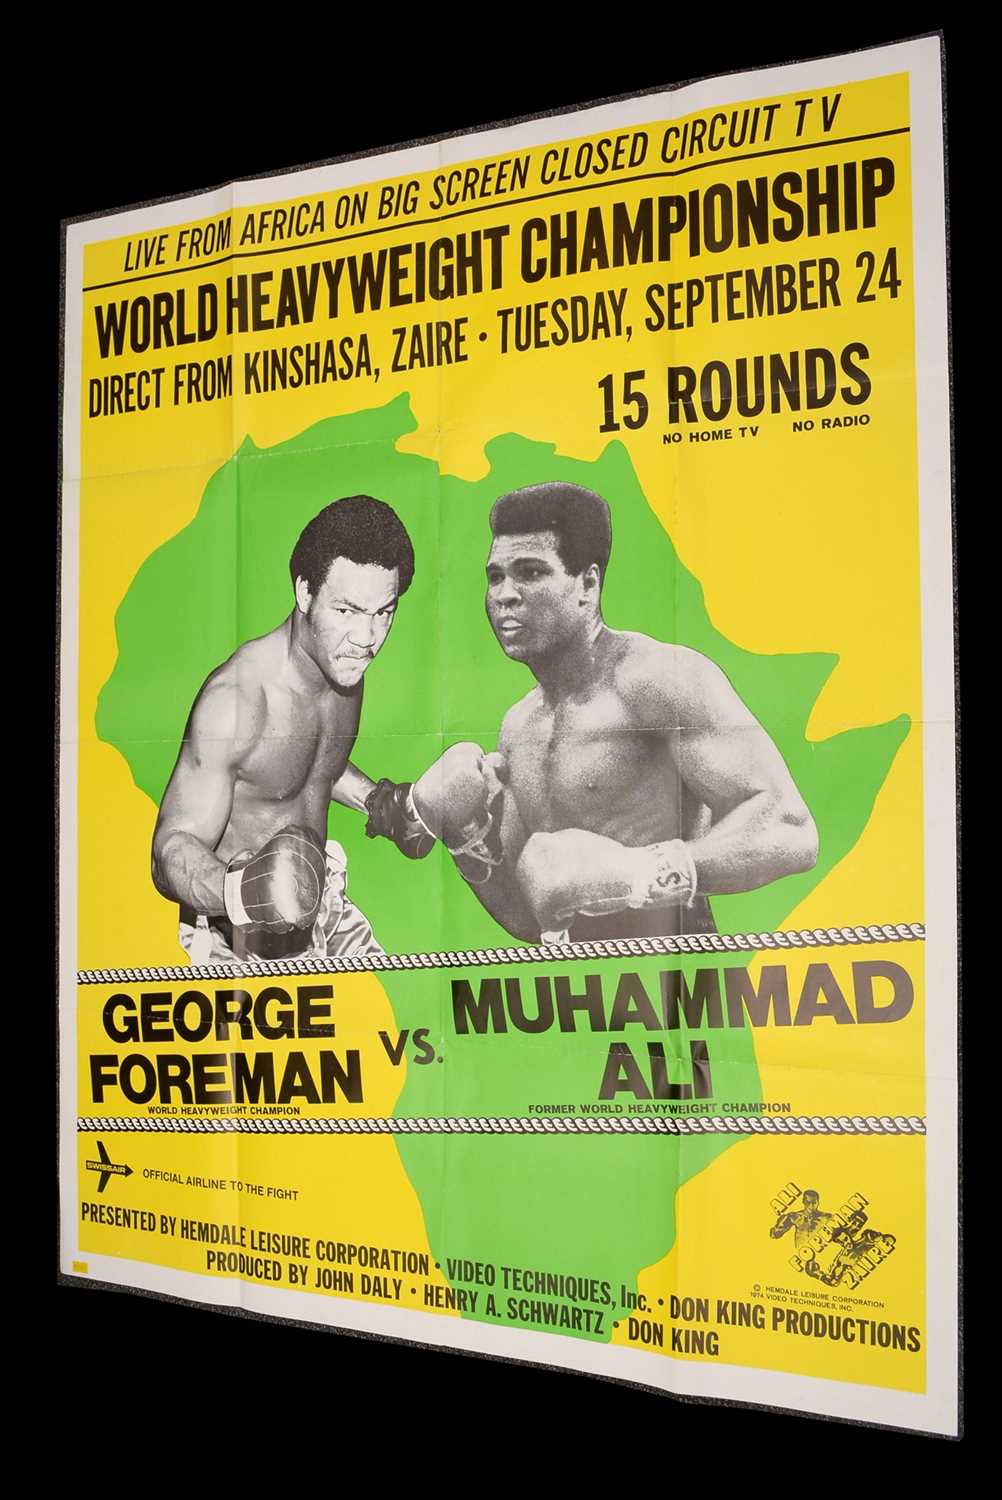 Lot 1568 - Rumble in the Jungle Poster